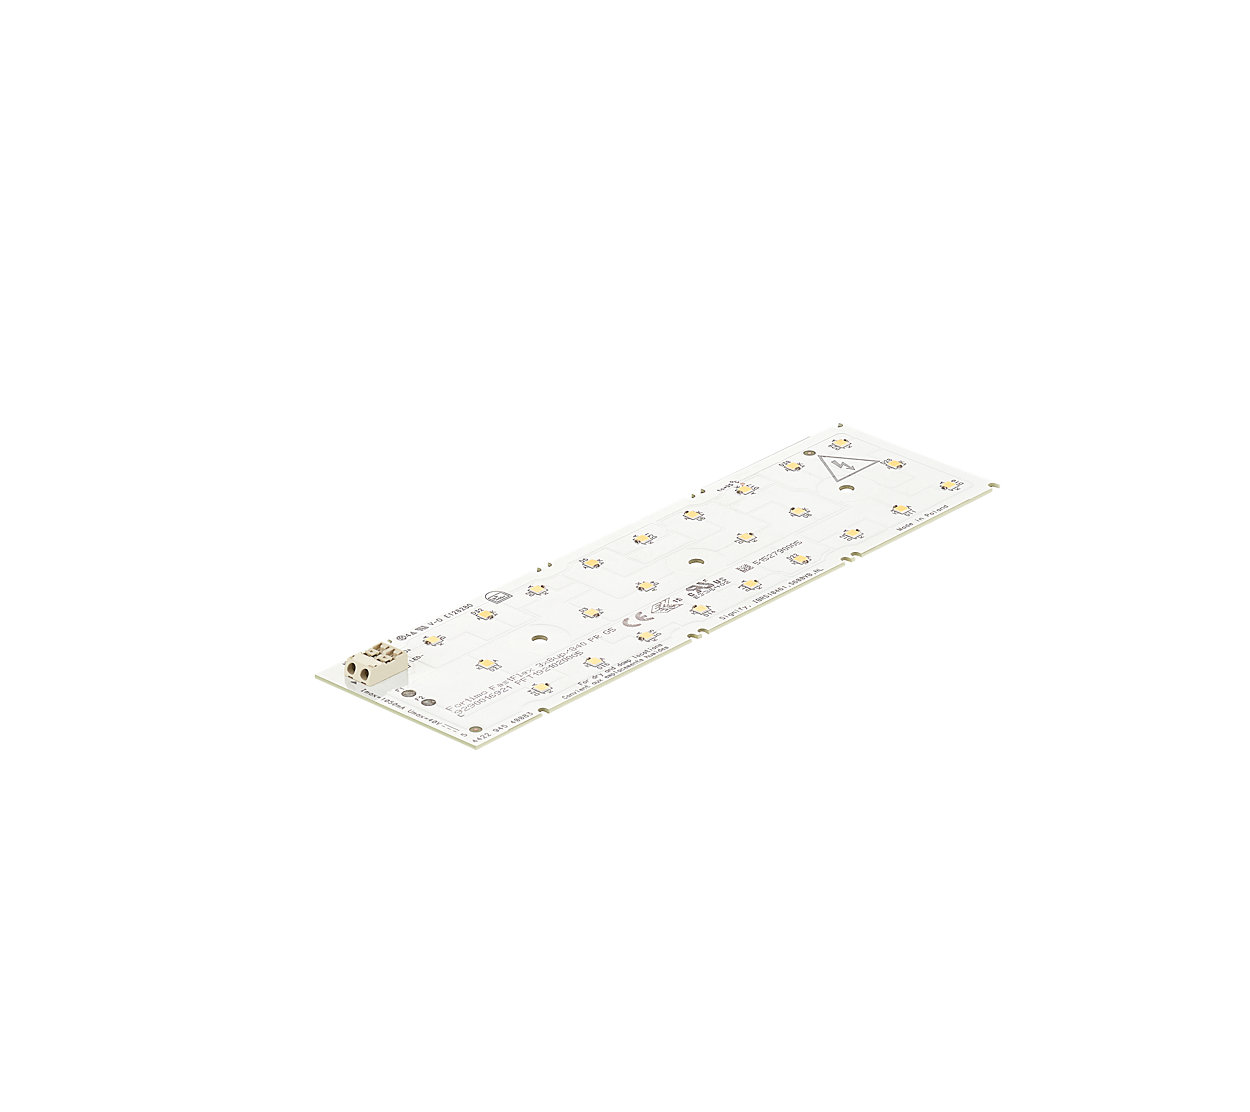 Flexible LED system approach for outdoor and industry LED lighting